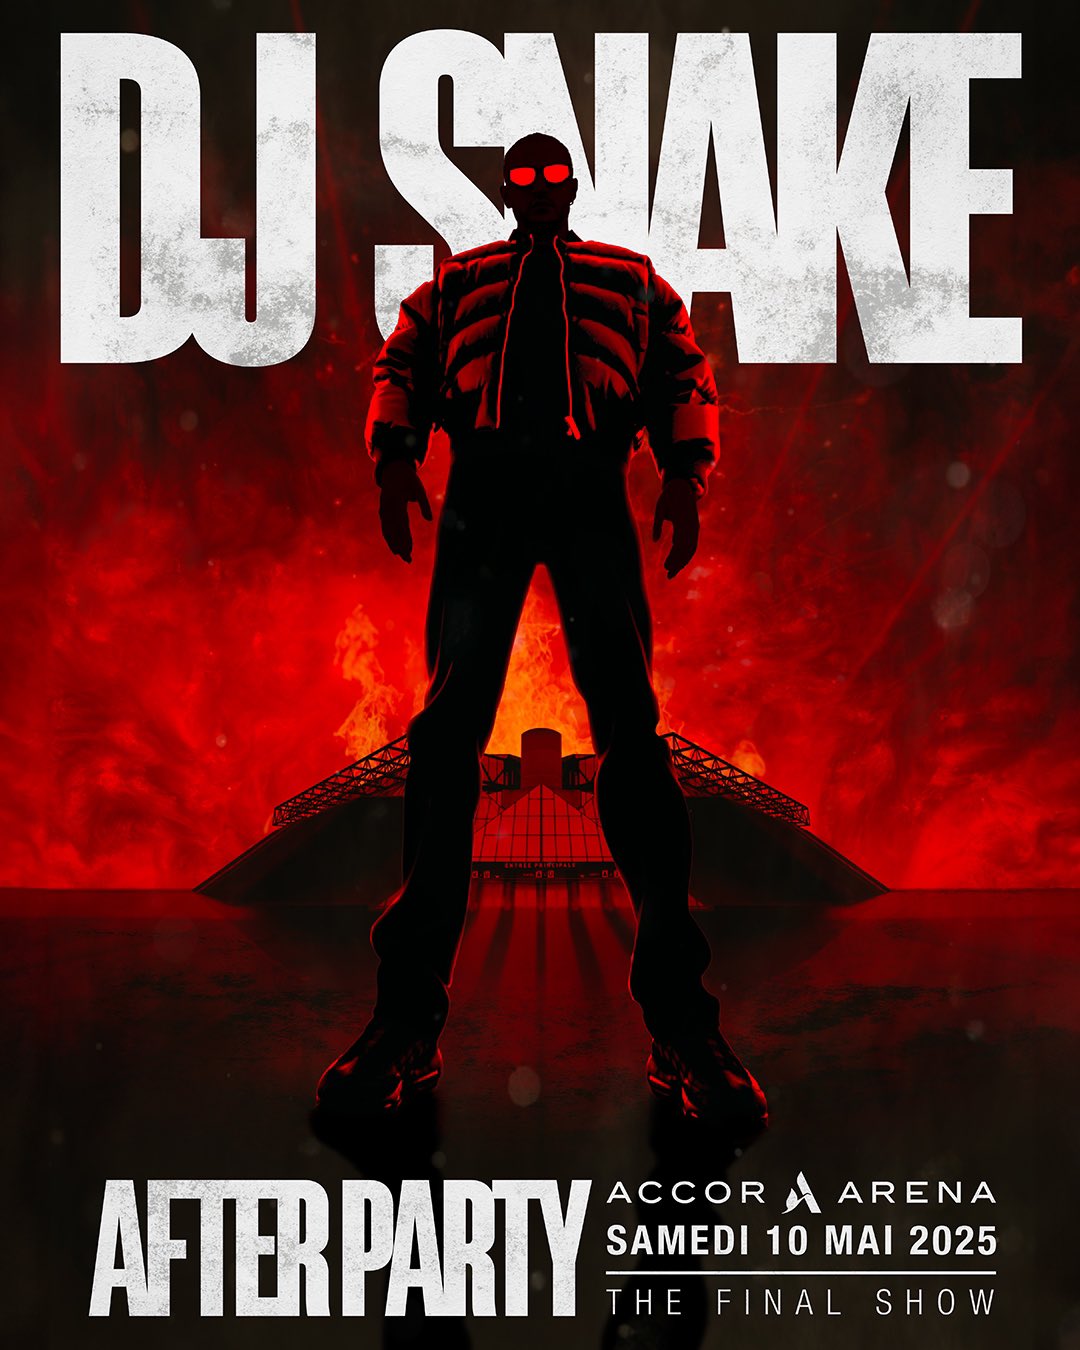 DJ Snake After Party al Accor Arena Tickets